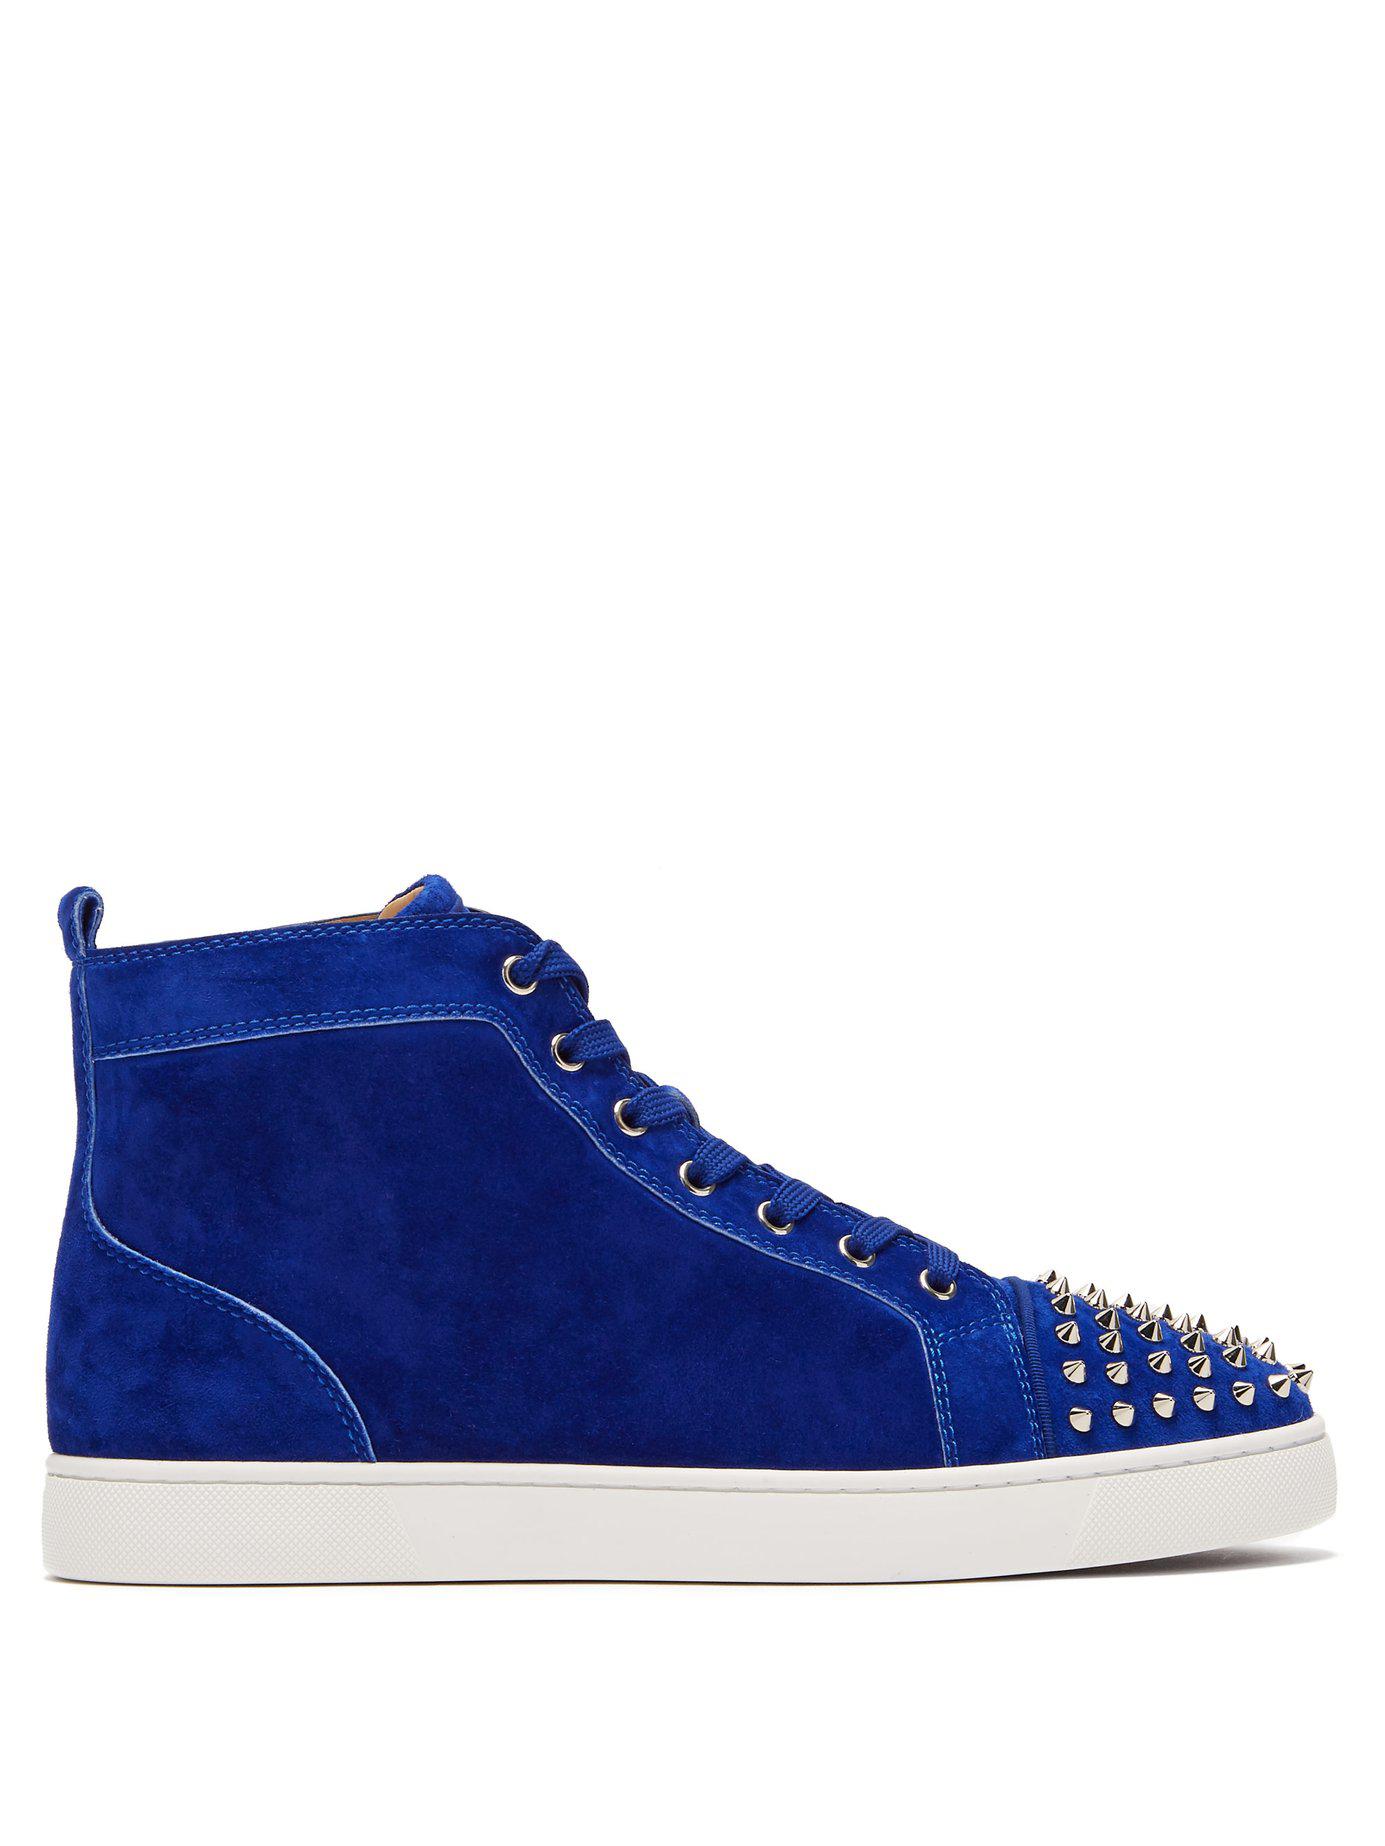 Lyst - Christian Louboutin Lou Spike Embellished Suede High Top ...